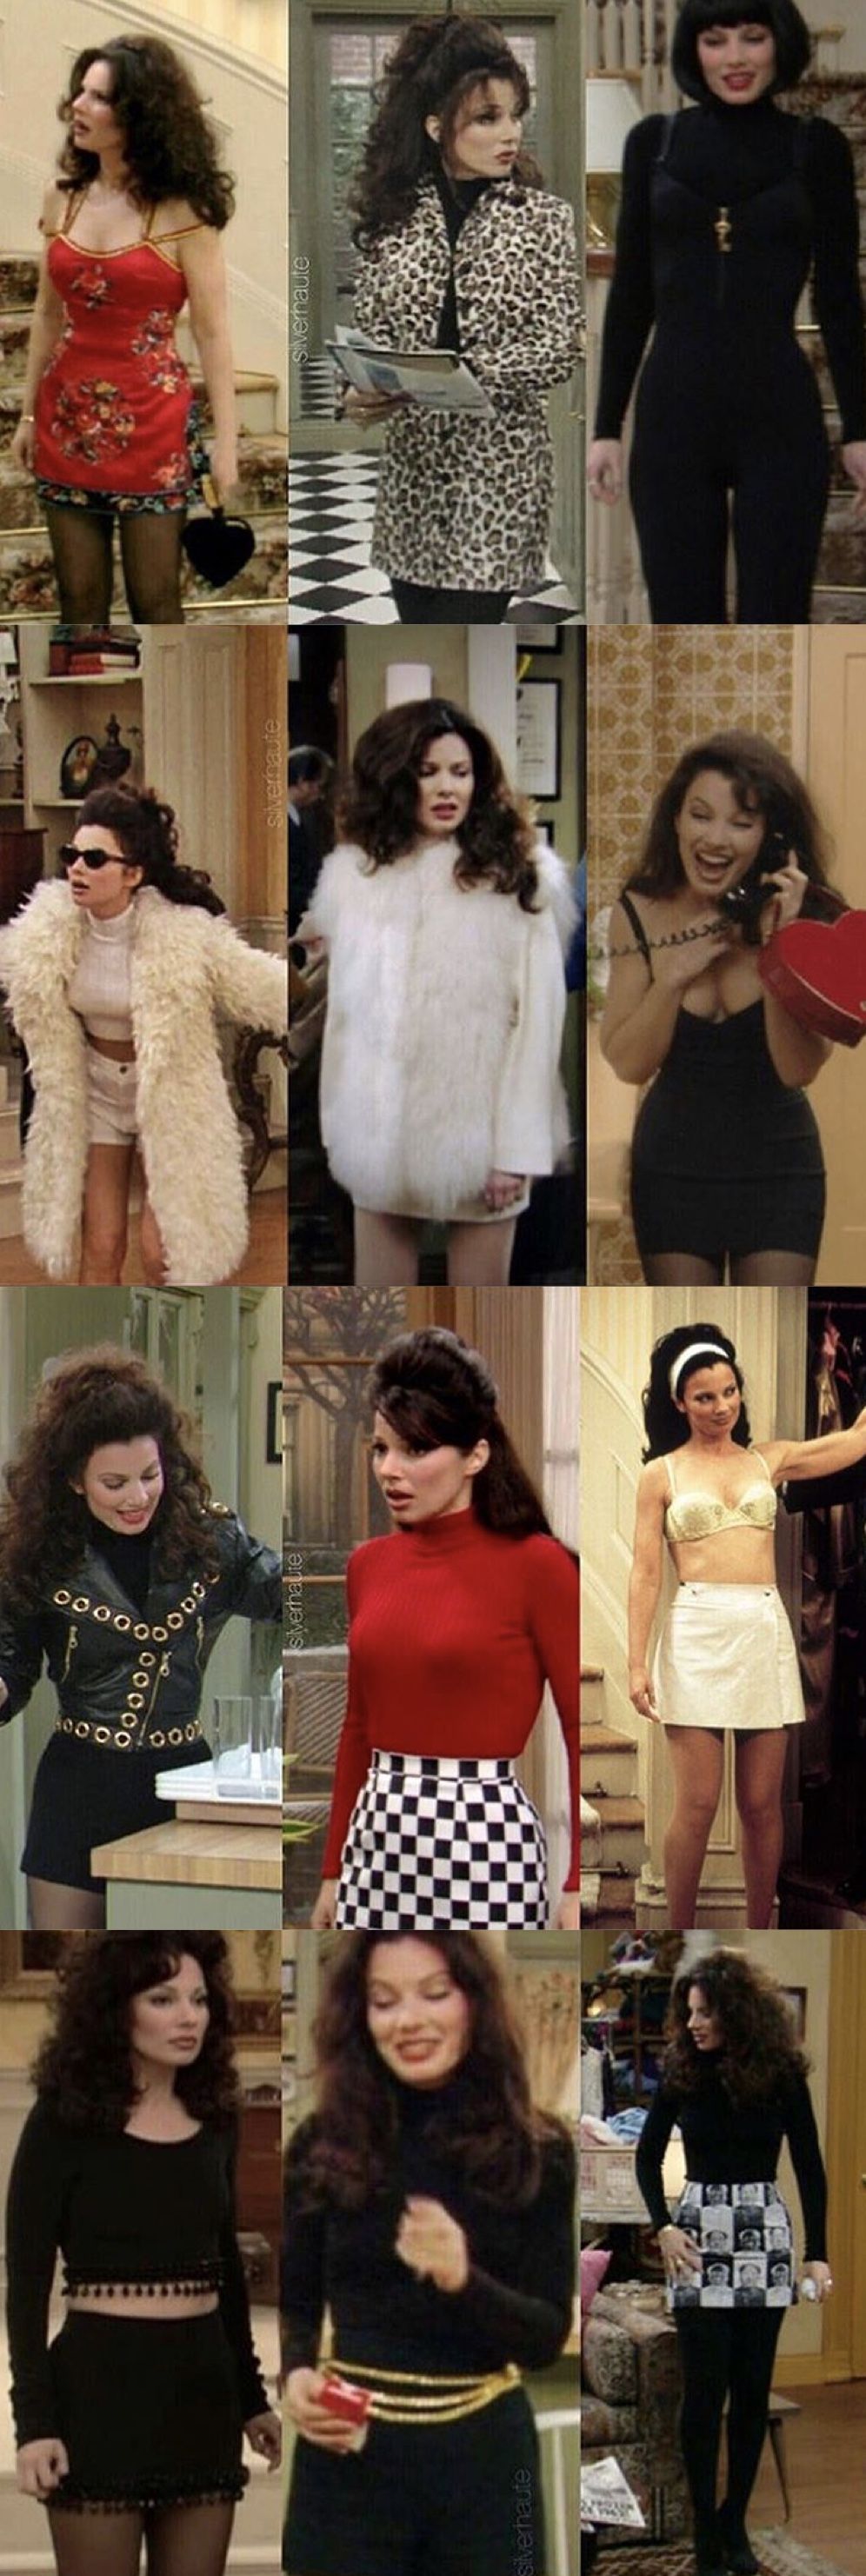 nanny looks I LOVED HER! Bye, going to rewatching right now for the funnies and the fashion. -   Awesome 90’s iconic style ideas